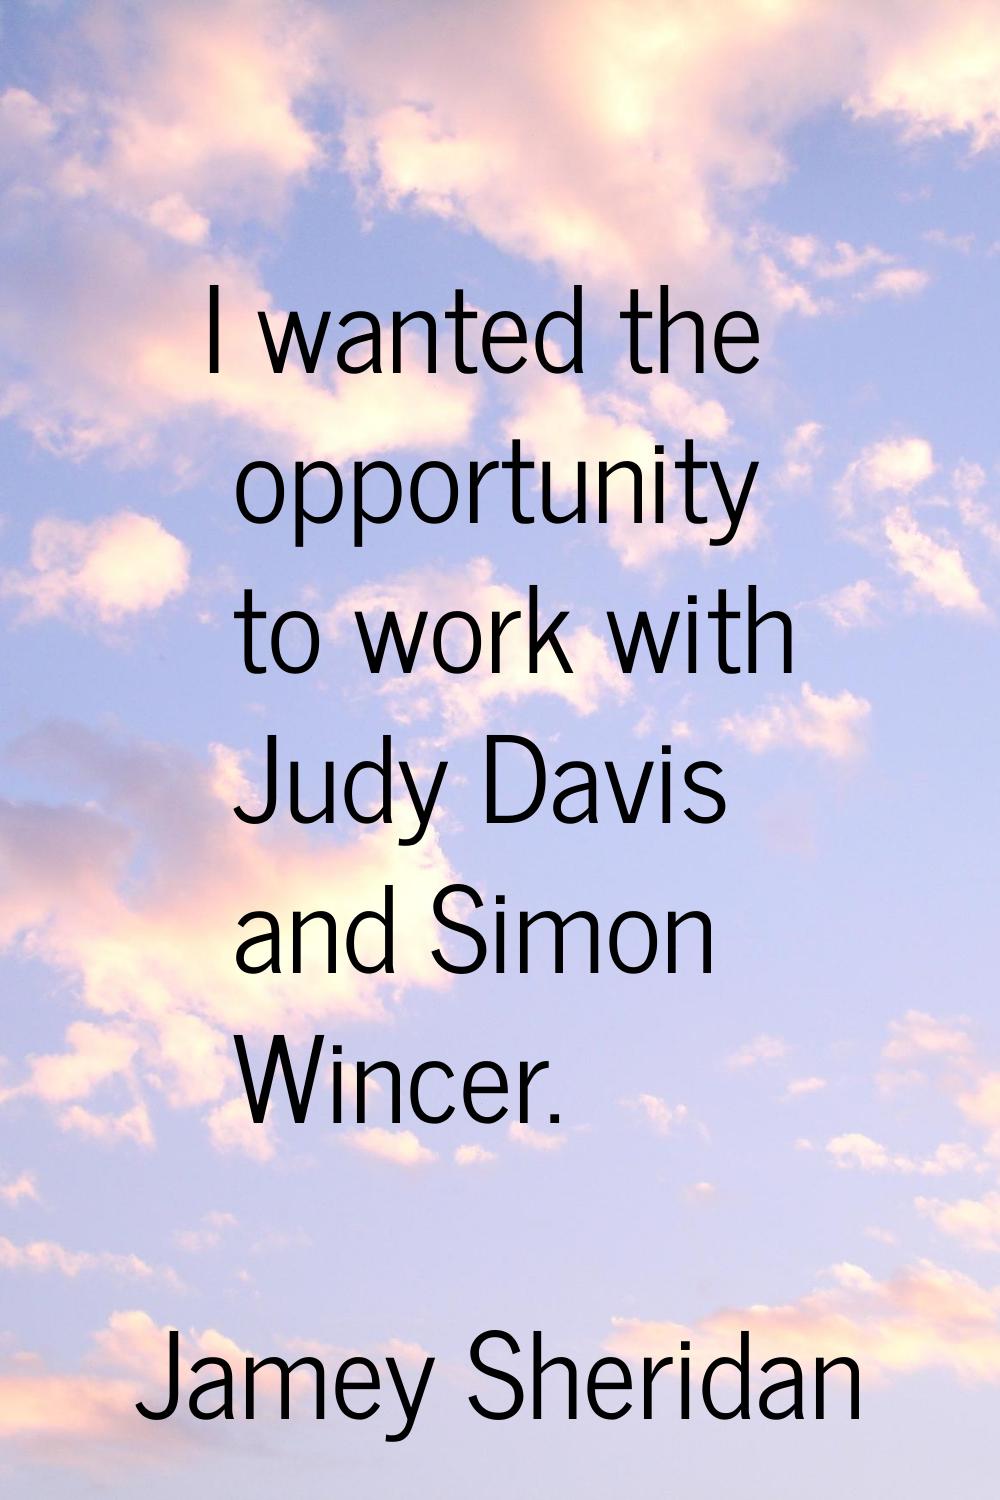 I wanted the opportunity to work with Judy Davis and Simon Wincer.